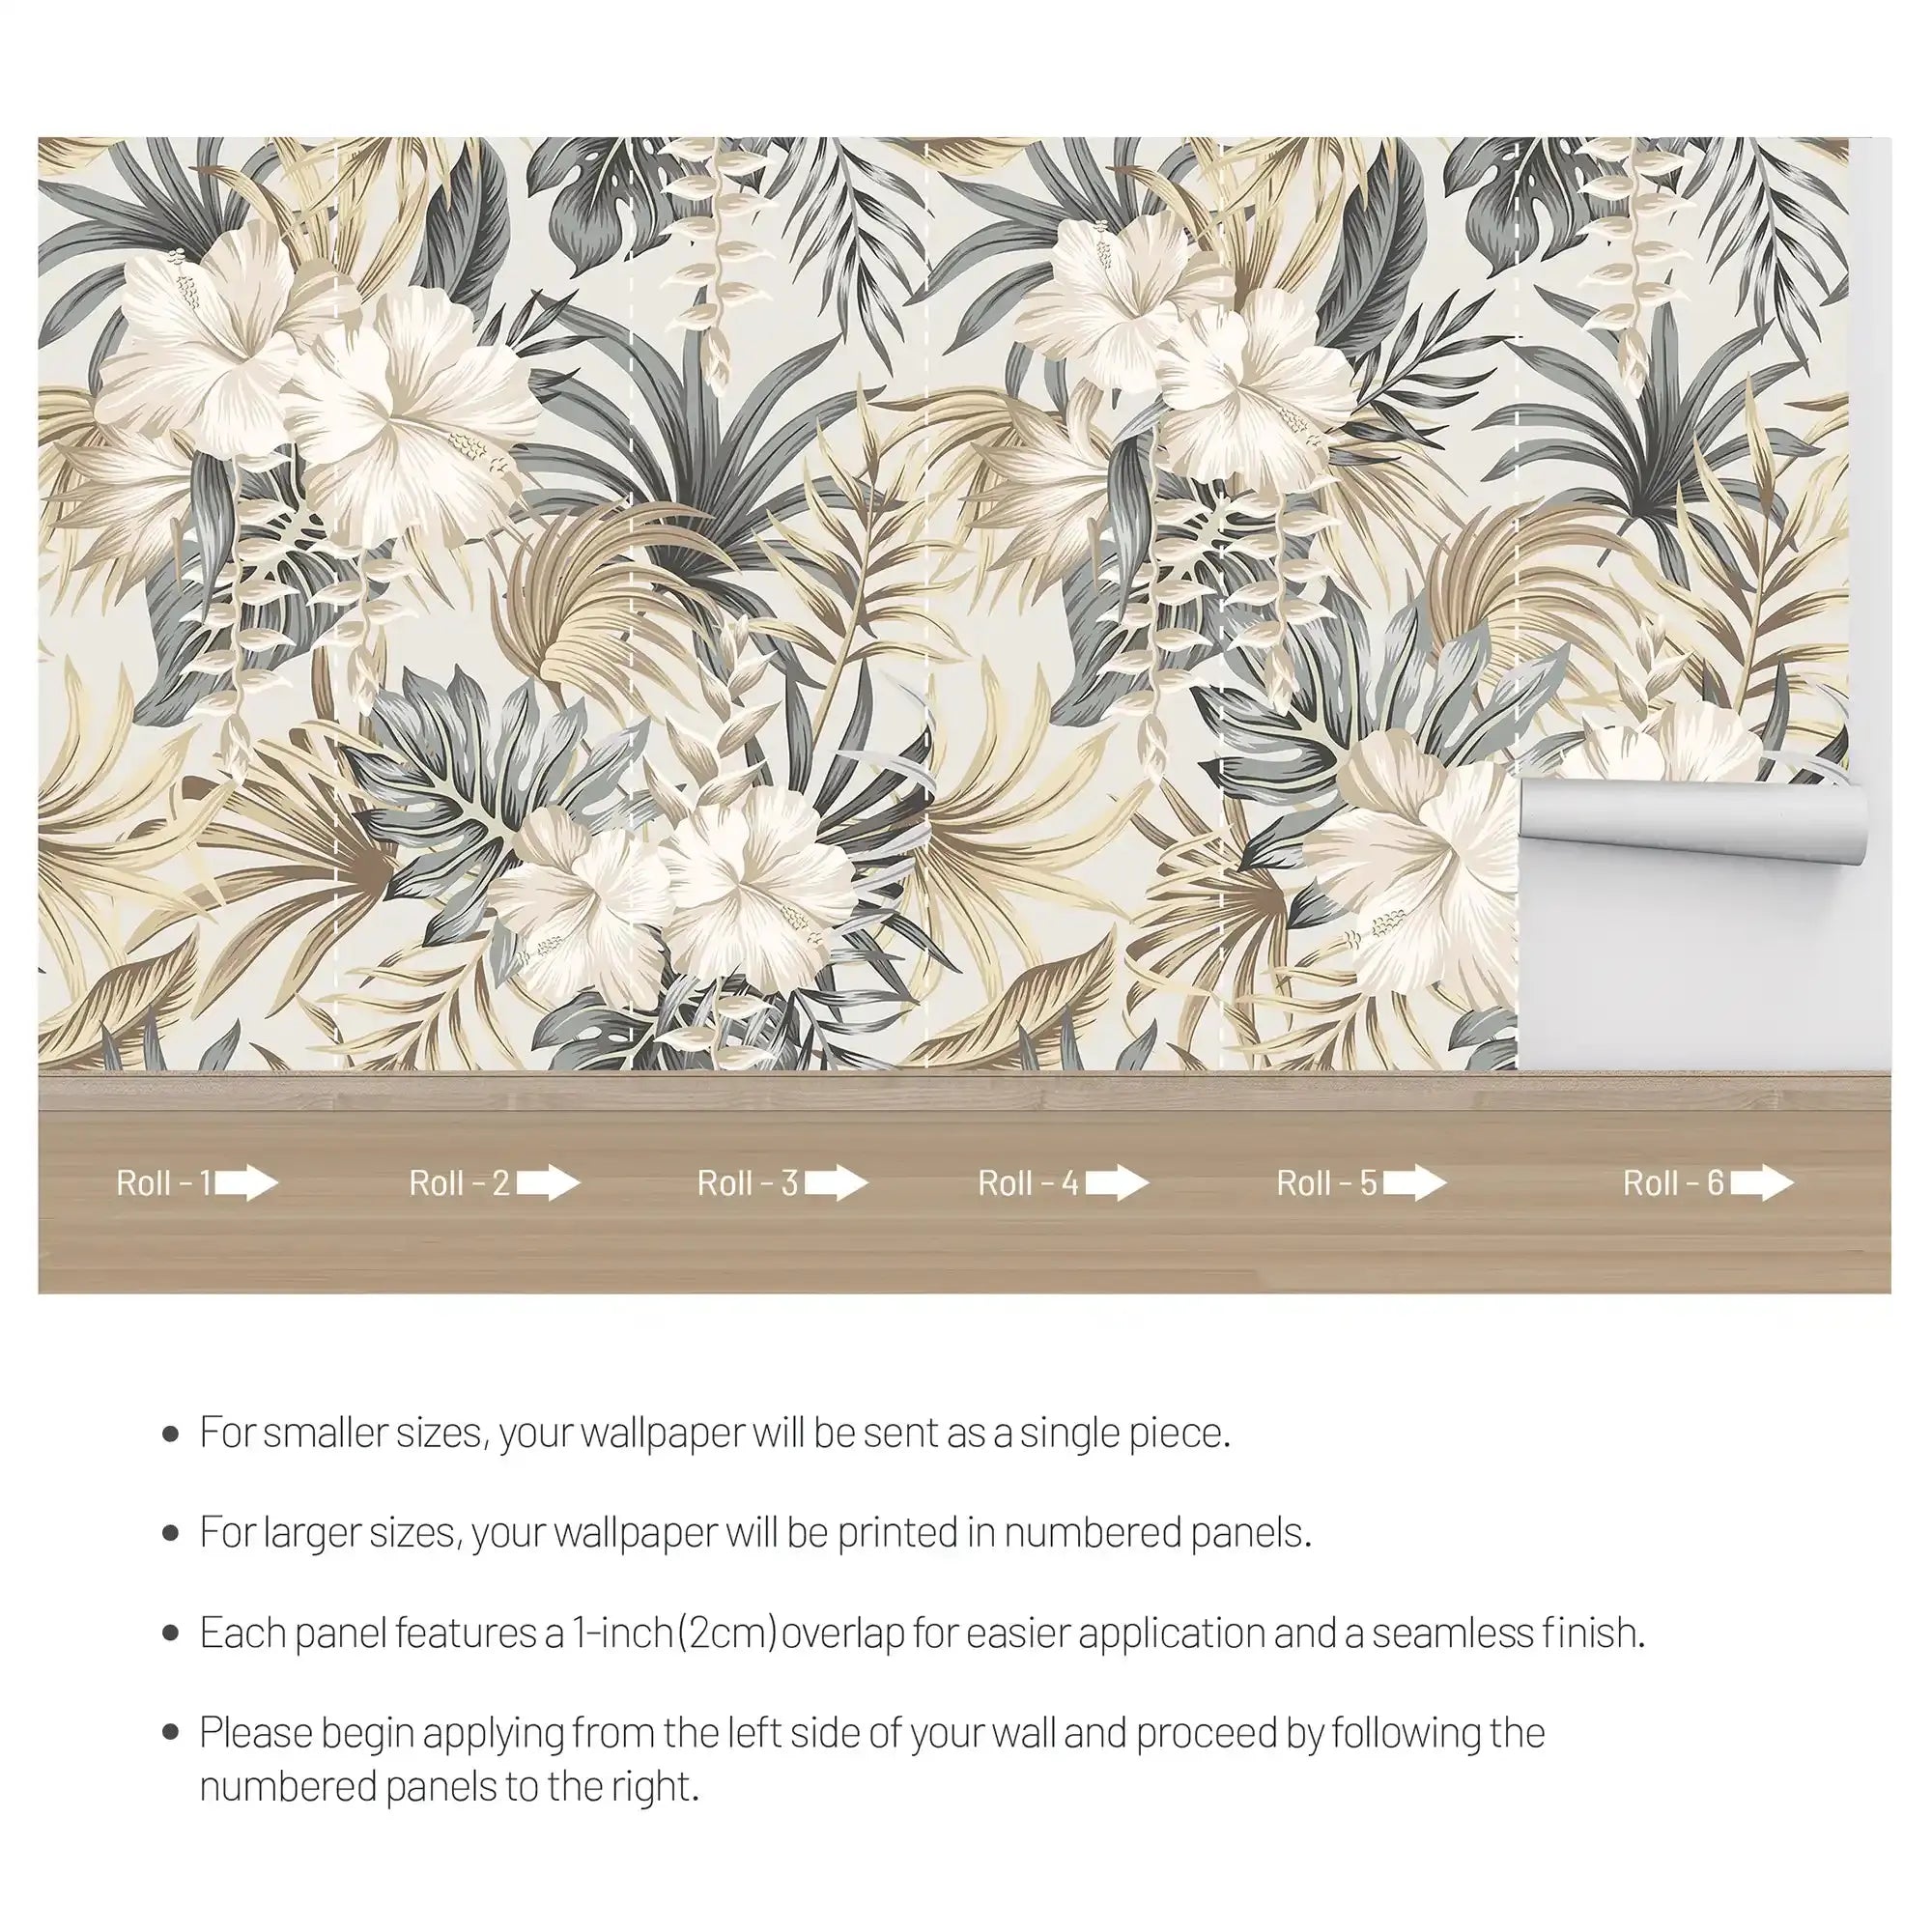 3099-E / Contemporary Floral Peel and Stick Wallpaper, Trendy Tropical Pattern, Adhesive Wall Paper, Easy Installation for Kitchen, Bedroom, Bathroom - Artevella